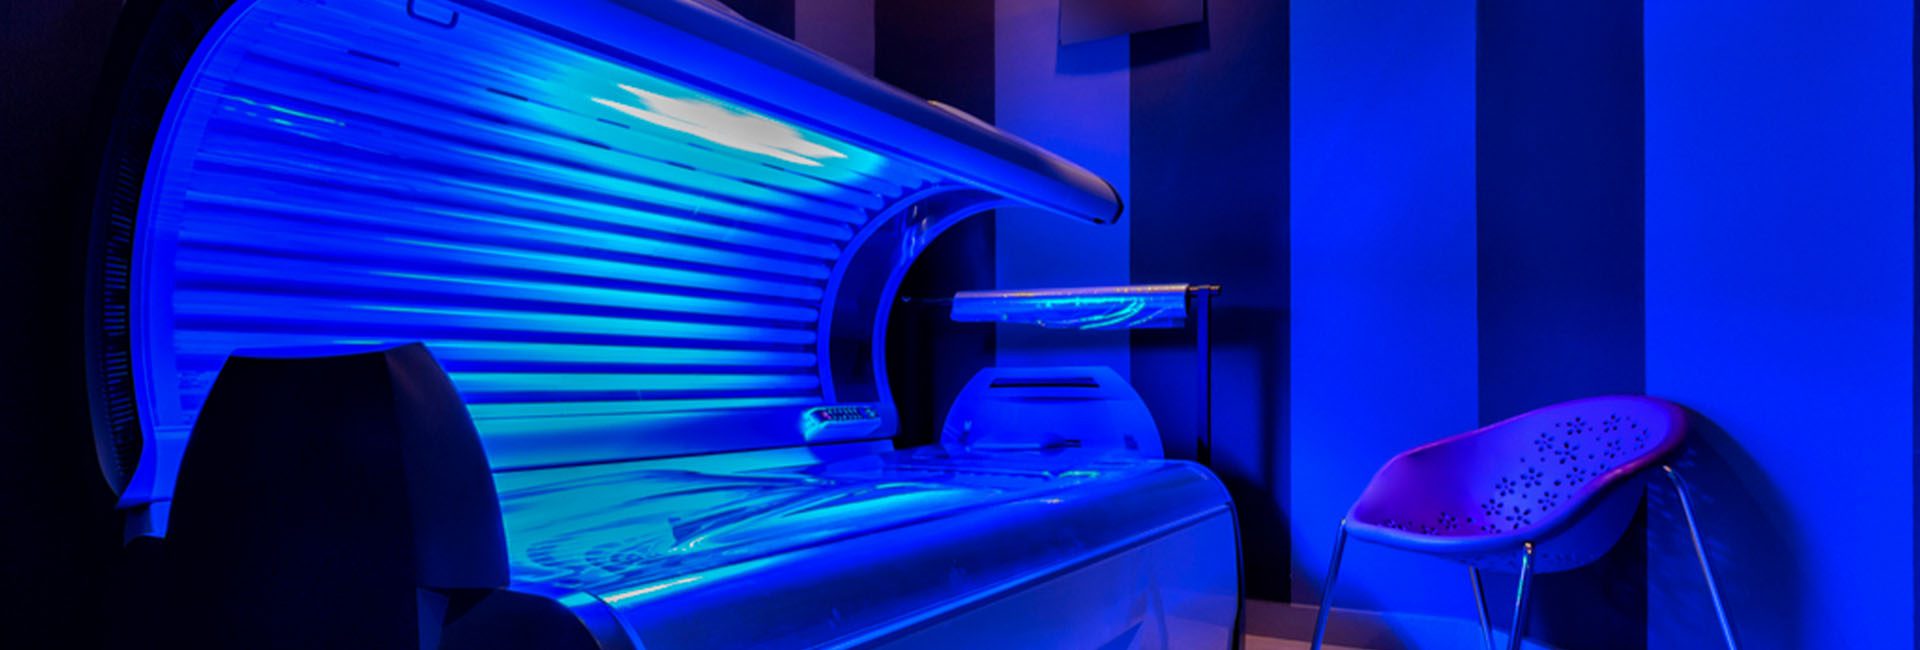 tanning options in a modern gym